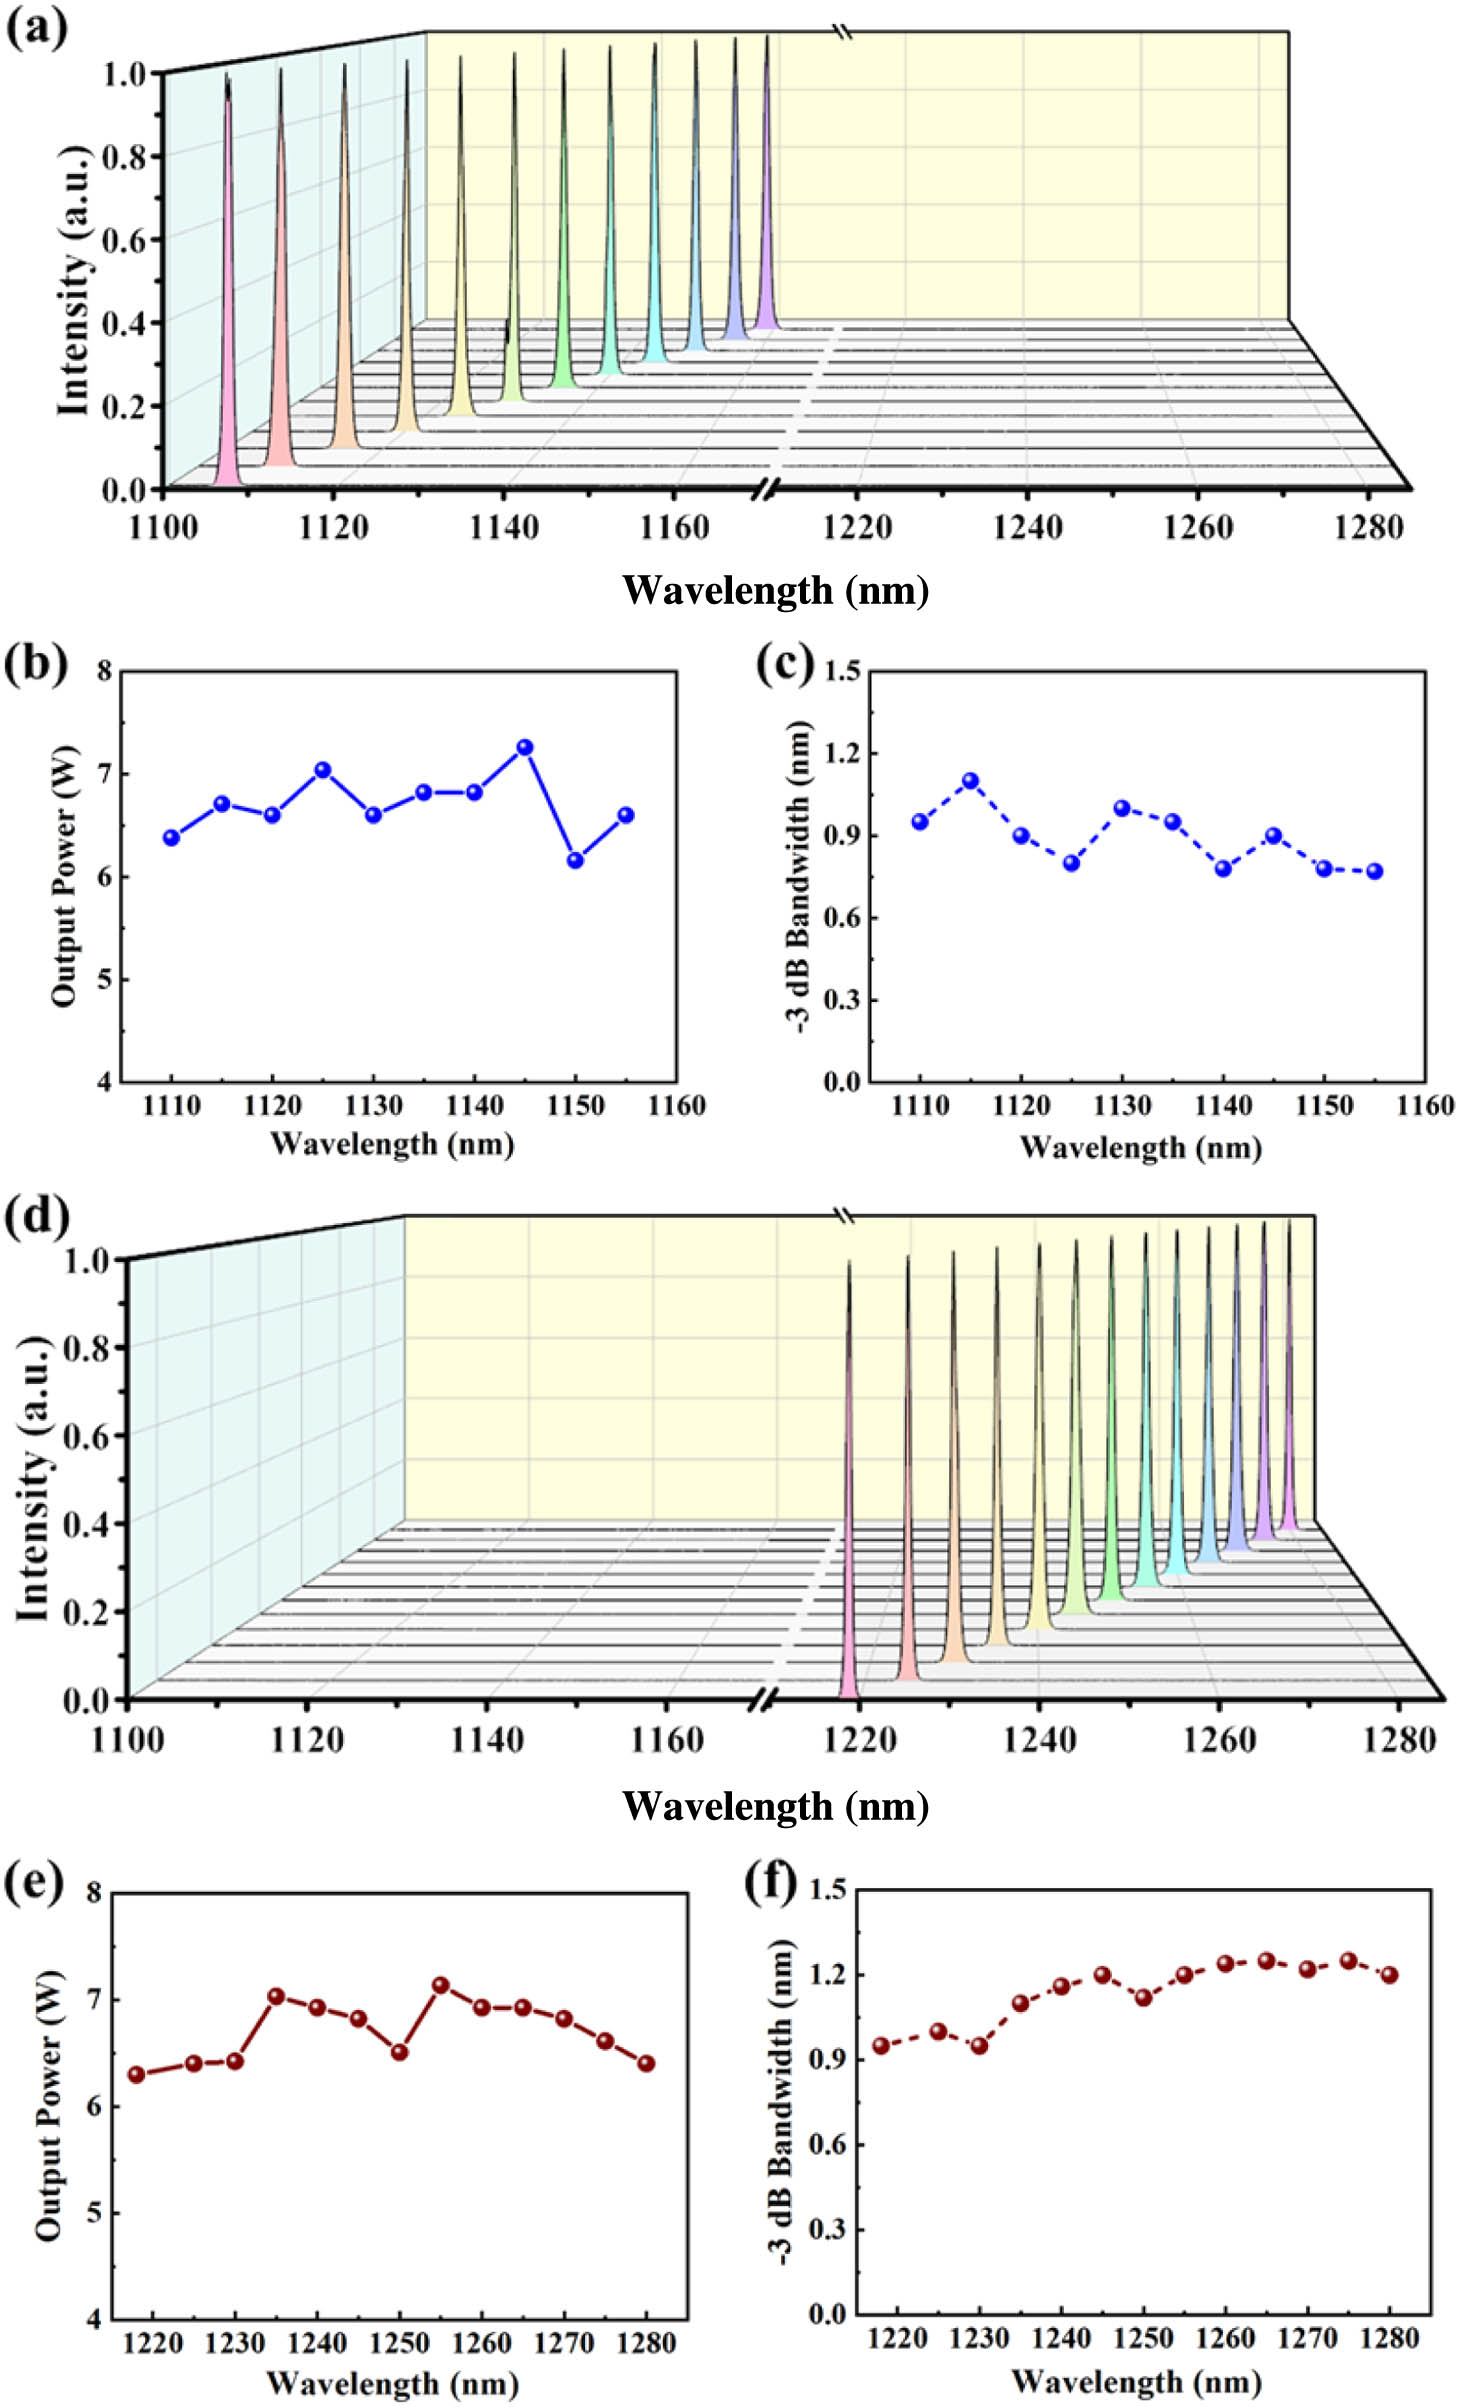 (a) Spectra of the wavelength tunable RRFL based on the silica-related Raman peak with a wavelength tuning range from 1105 to 1160 nm. (b) Output powers of the wavelength tunable RRFL based on the silica-related Raman peak as a function of center wavelengths. (c) −3 dB bandwidths of the wavelength tunable RRFL based on the silica-related Raman peak as a function of center wavelengths. (d) Spectra of the wavelength tunable RRFL based on the phosphorus-related Raman peak with a wavelength tuning range from 1217 to 1280 nm. (e) Output powers of the wavelength tunable RRFL based on the phosphorus-related Raman peak as a function of center wavelengths. (f) −3 dB bandwidths of wavelength tunable RRFL based on the phosphorus-related Raman peak as a function of center wavelengths.